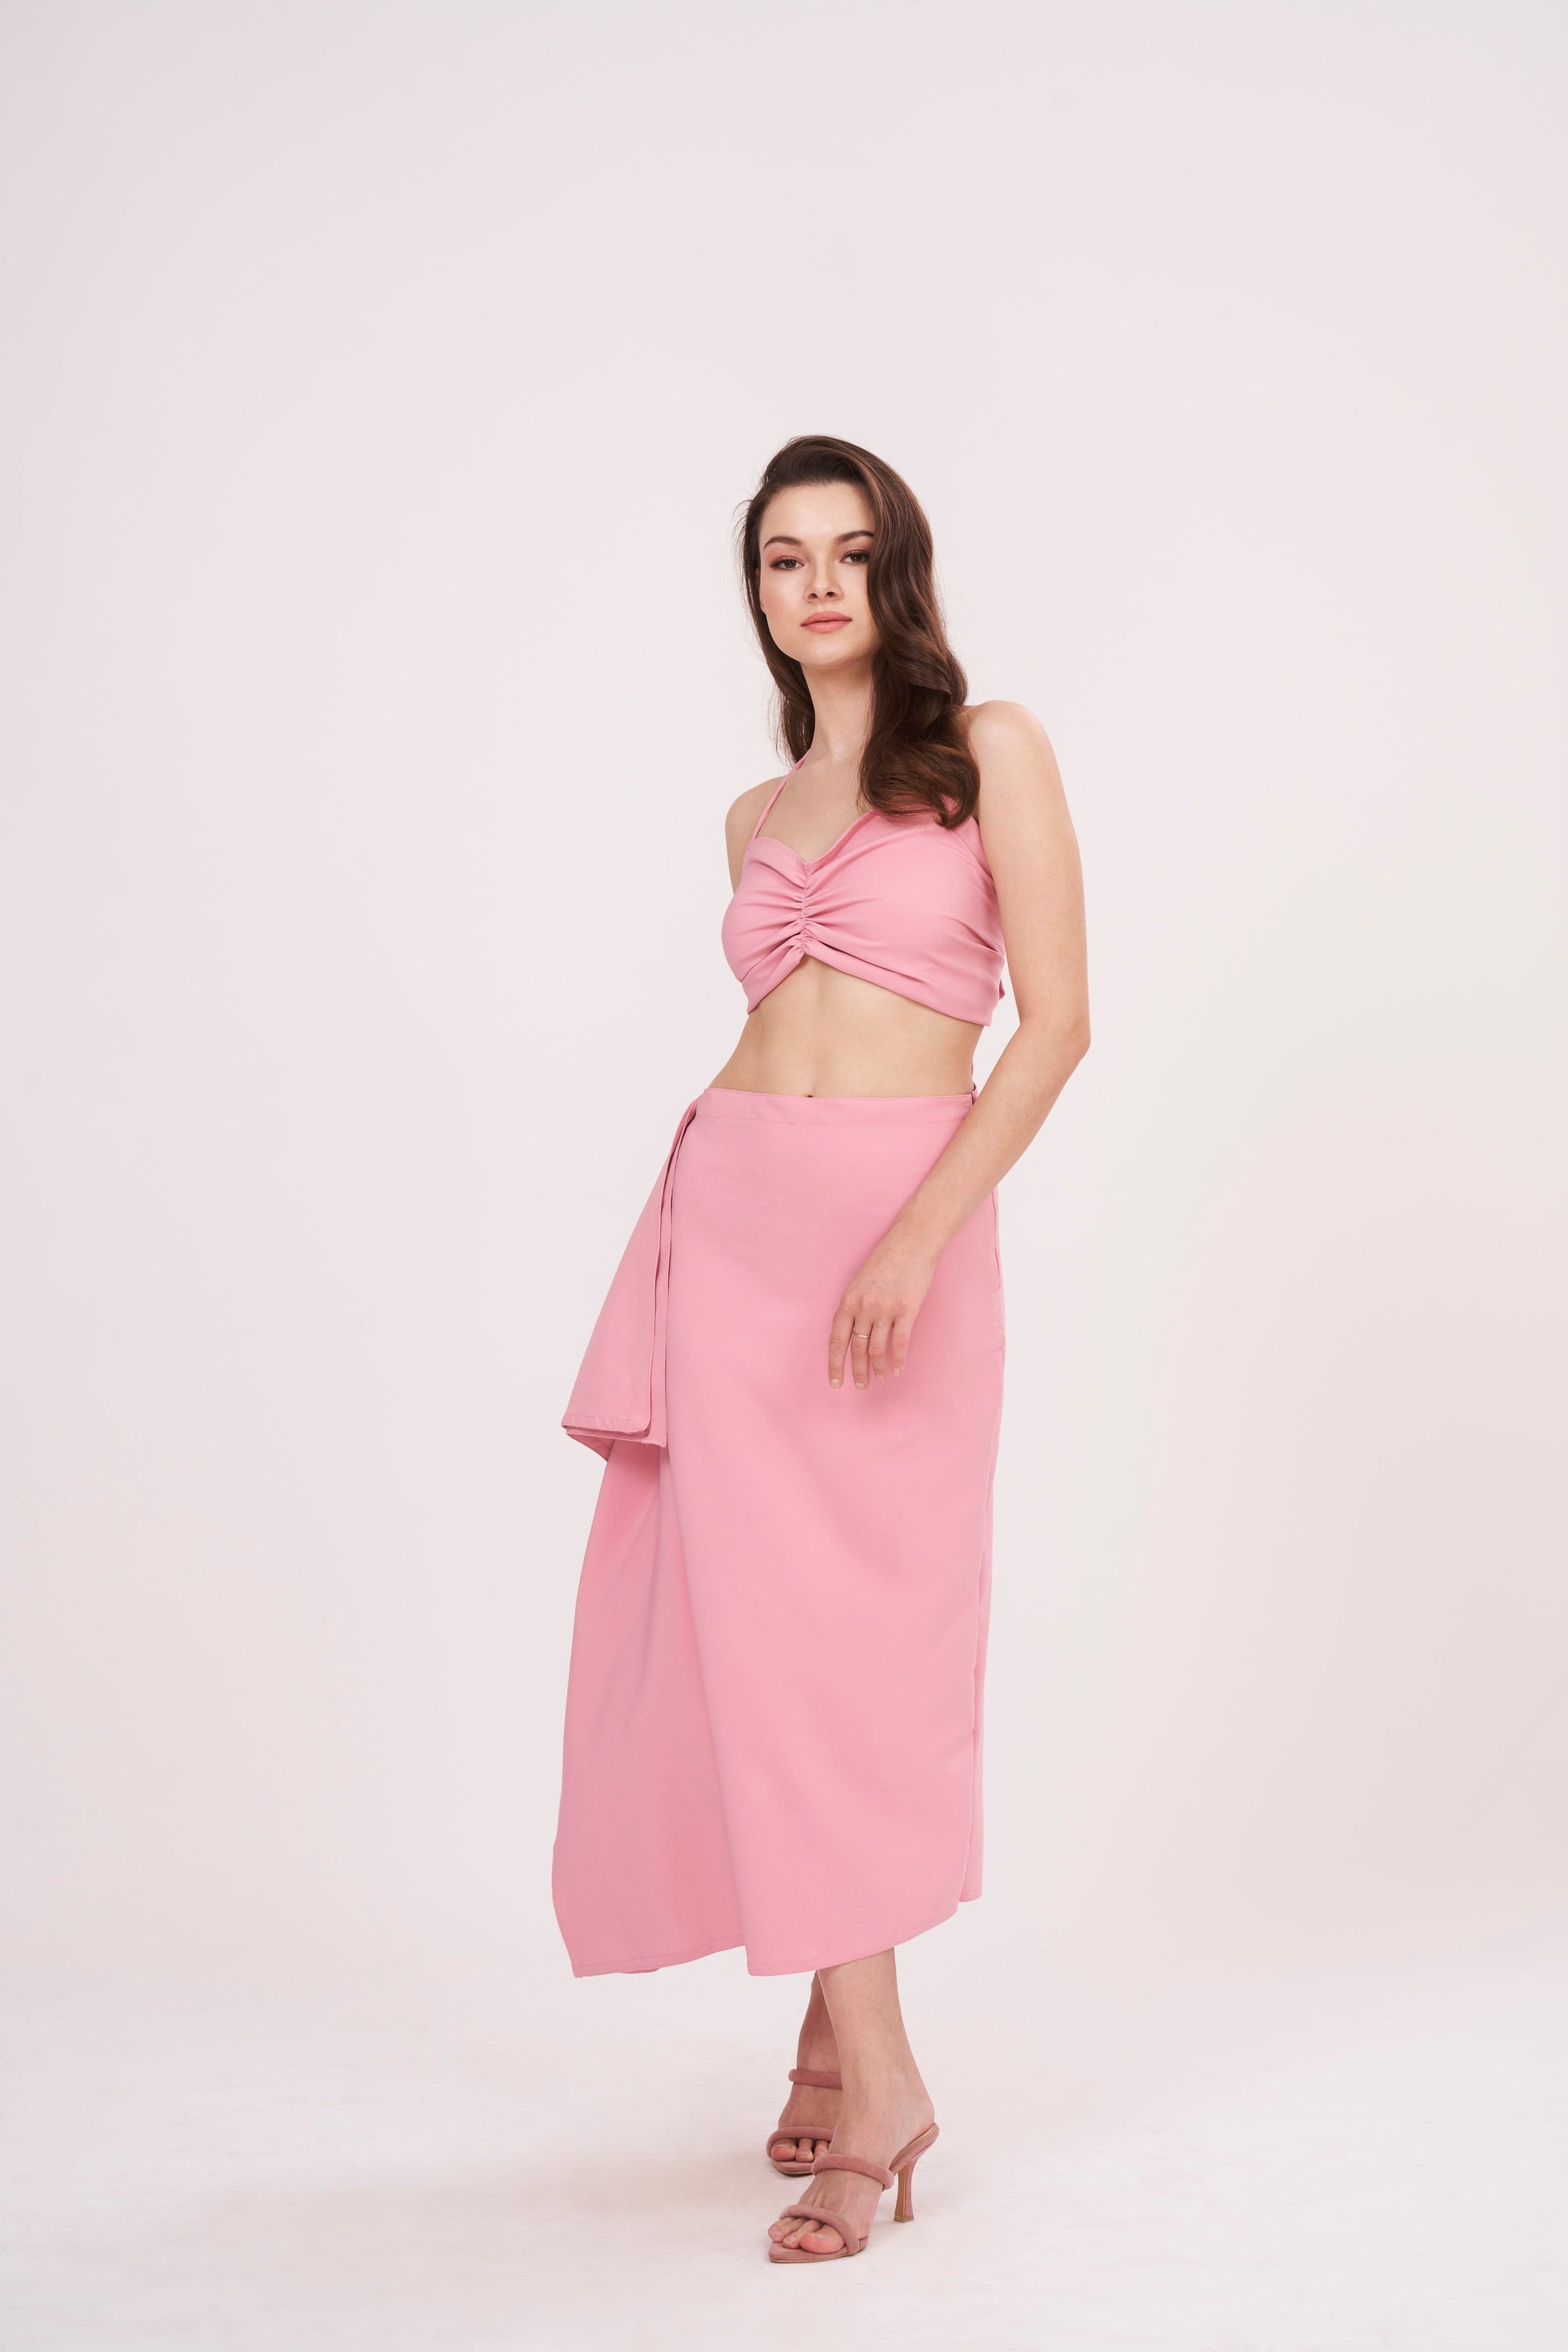 Tie-back crop top with ruched design and delicate pink hue. Ideal for any occasion. Can be paired with matching skirt or mixed and matched for a unique look.